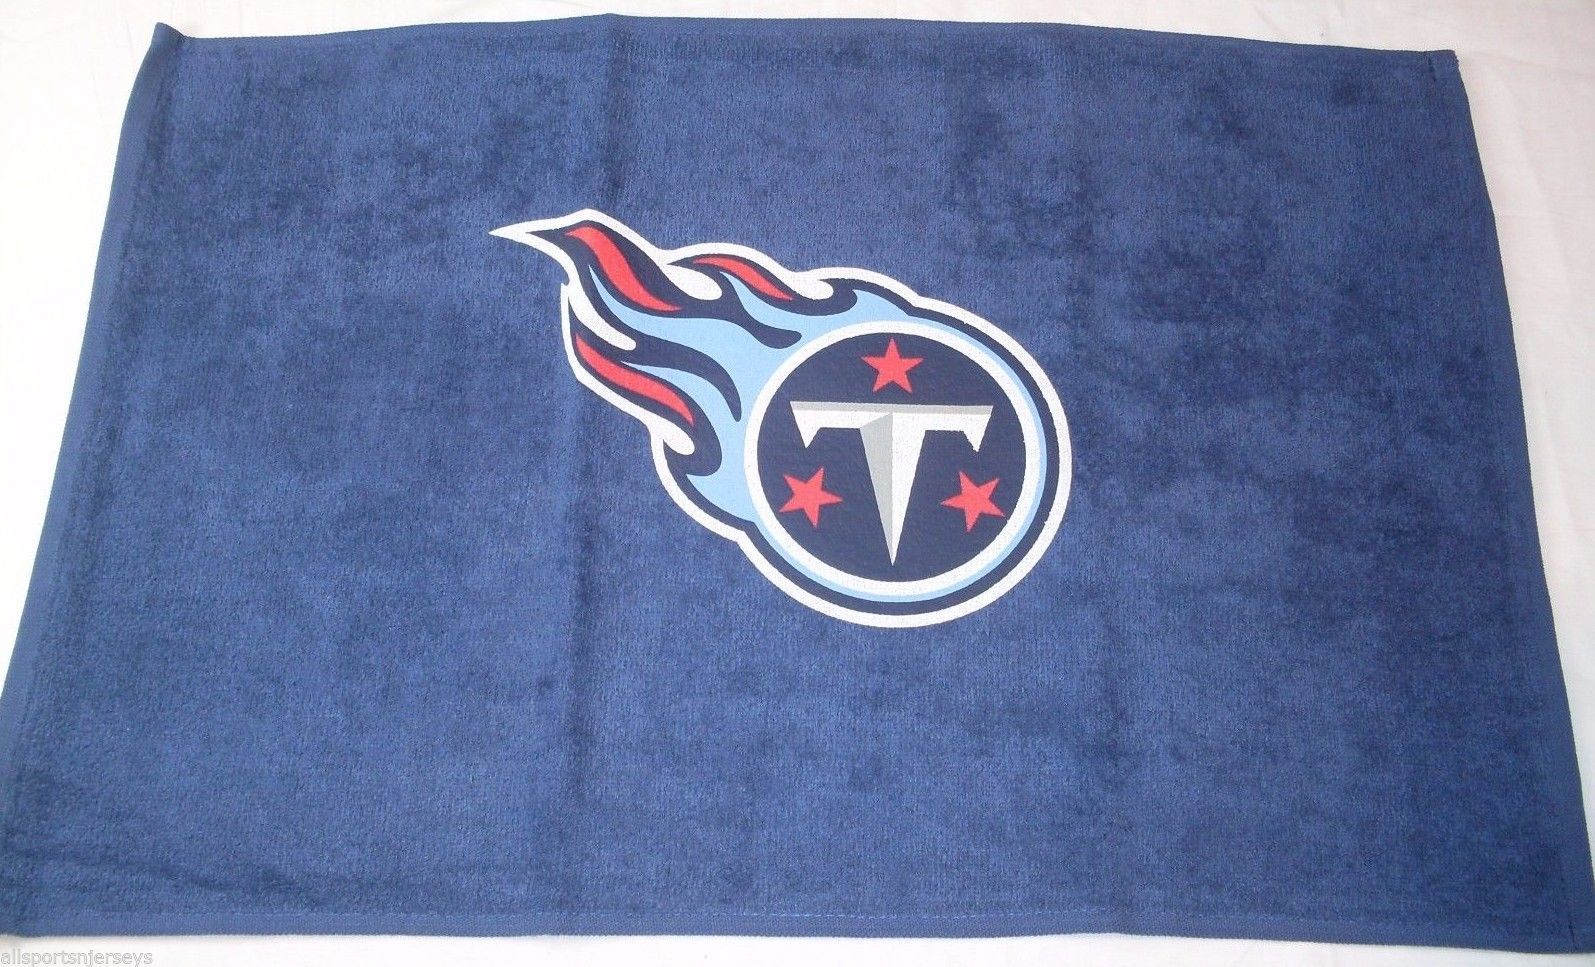 NFL Tennessee Titans Sports Fan Towel Navy 15" by 25" by WinCraft - $16.95